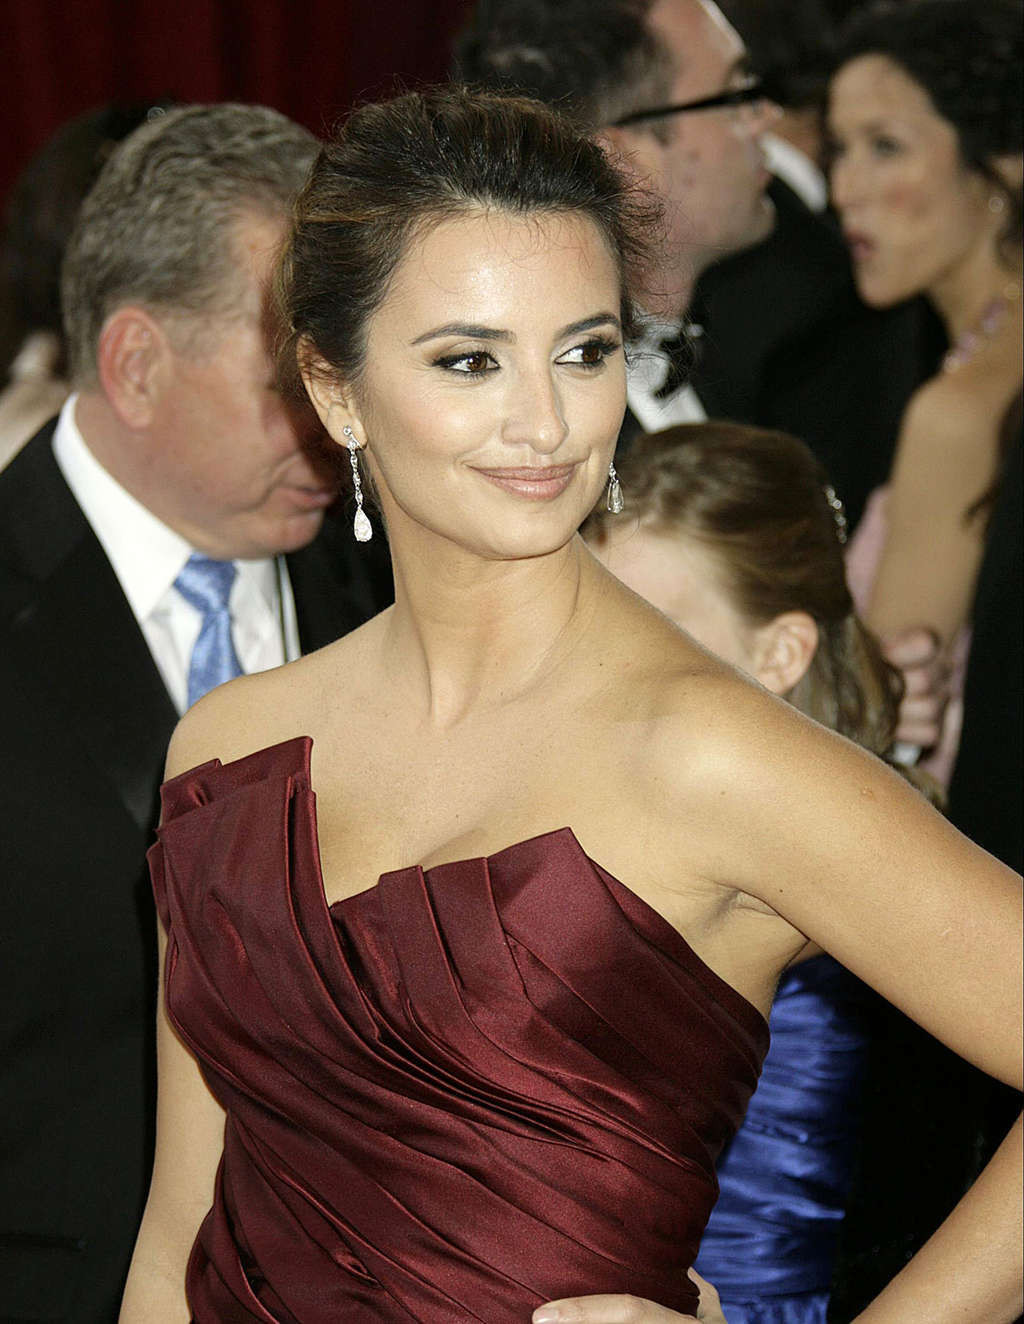 Penelope Cruz looking very hot and sexy in her evening skirt #75357232